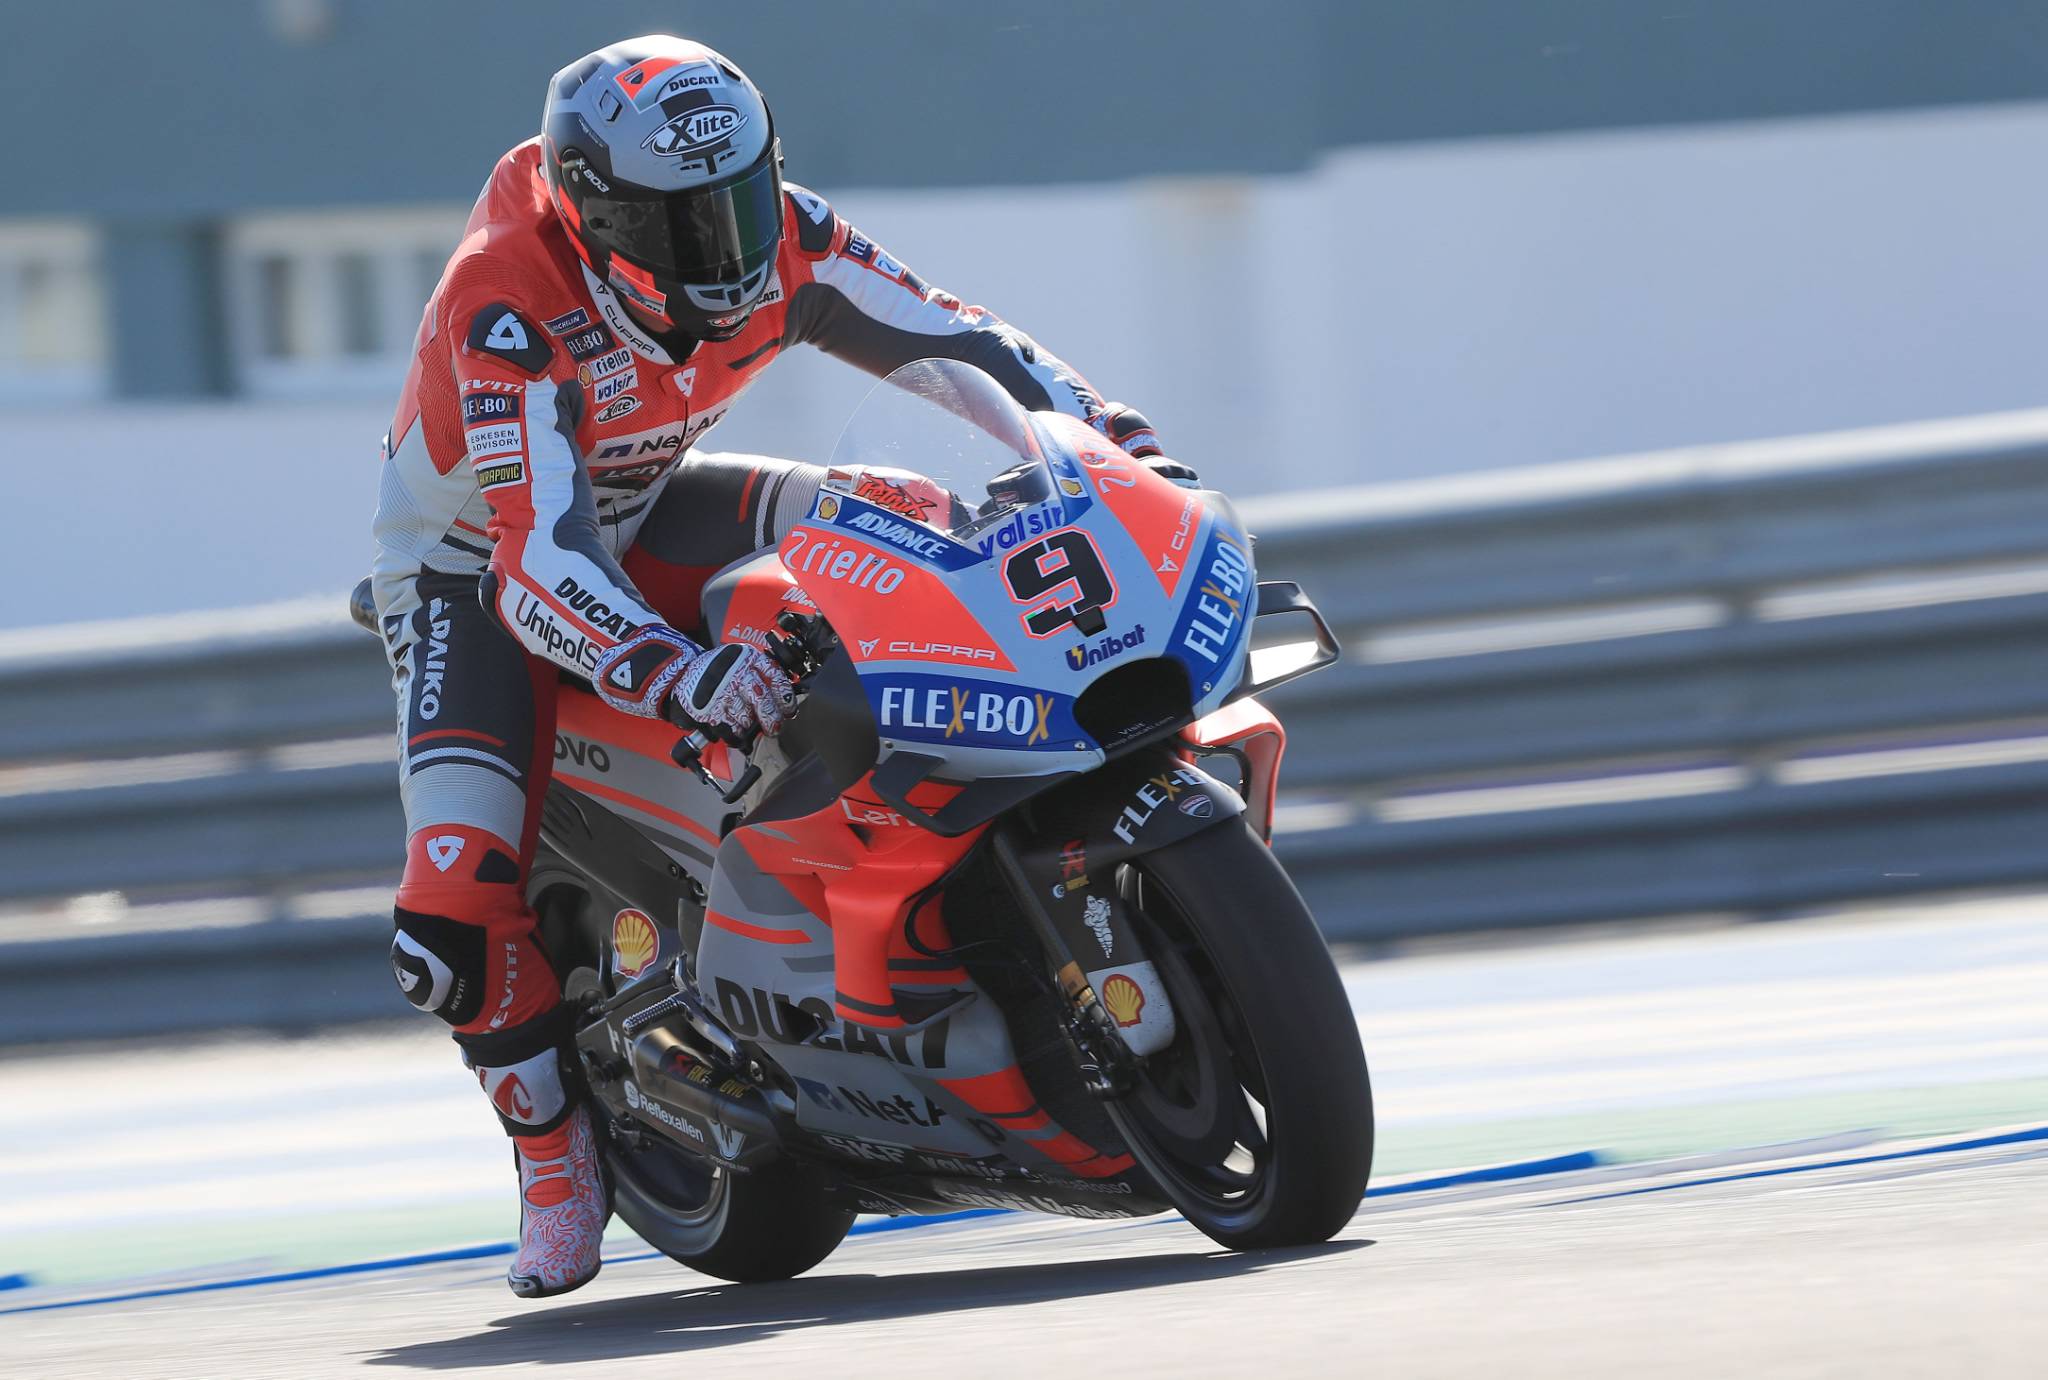 MotoGP Jerez FP2 Results: Top Performers, Track Conditions, and Incidents